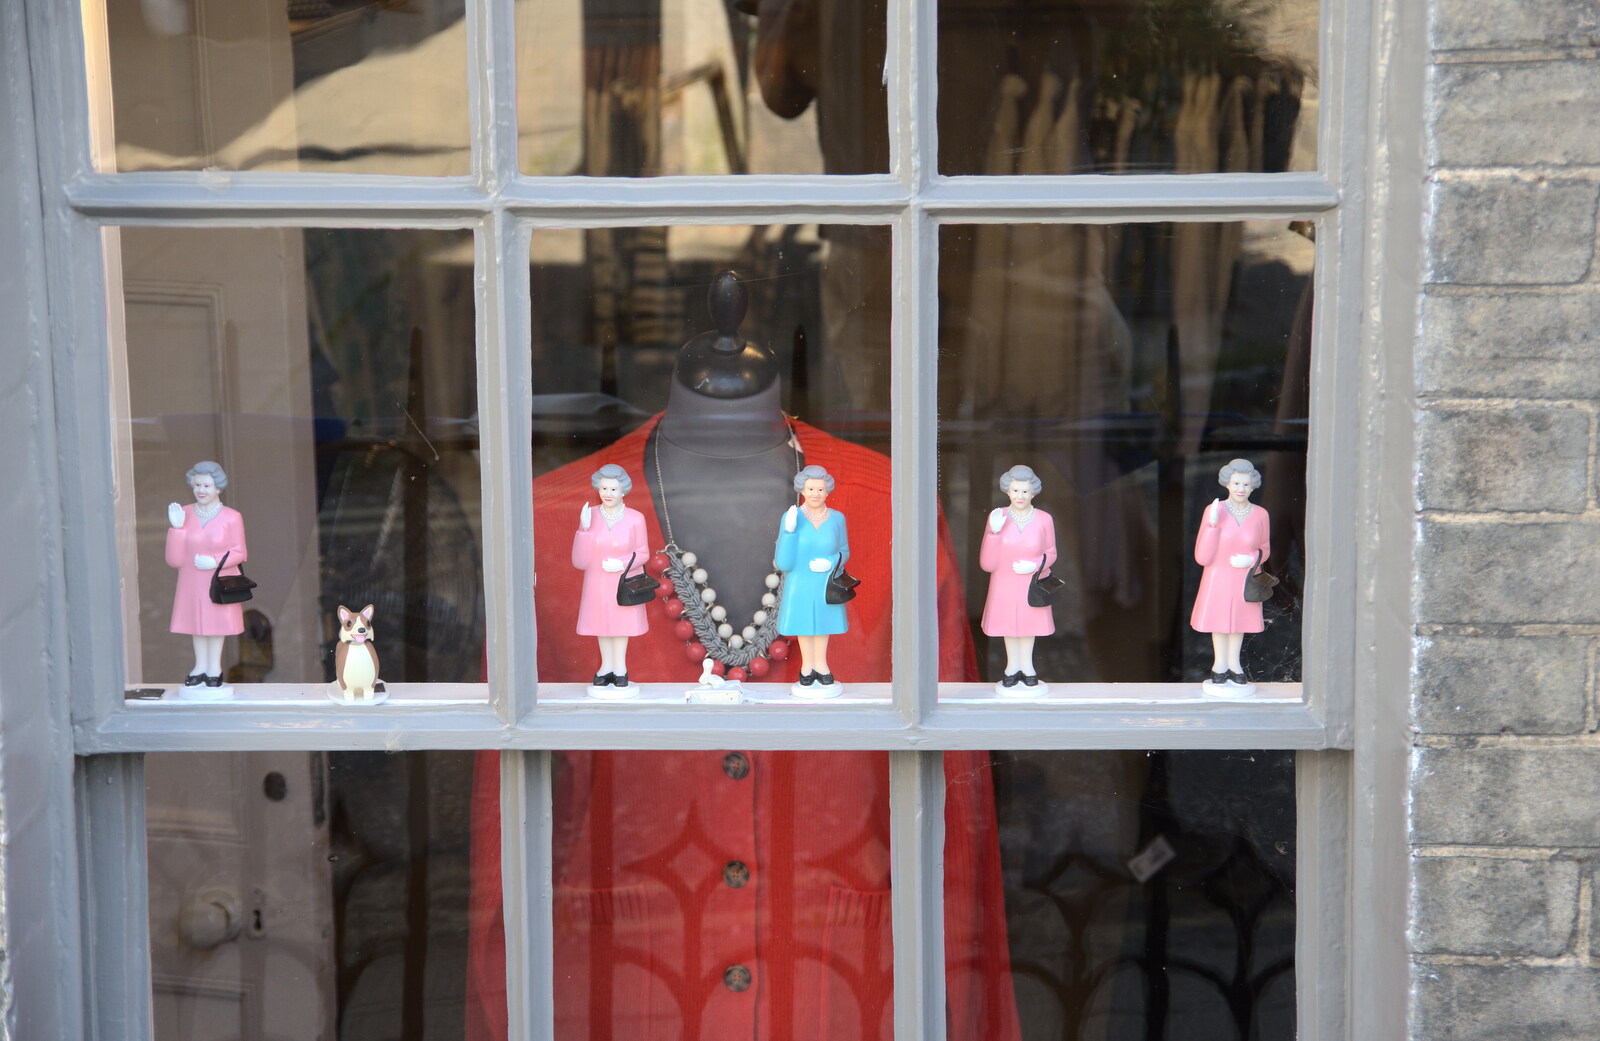 A Trip to Framlingham, Suffolk - 28th July 2022: There are a load of waving queens in a shop window